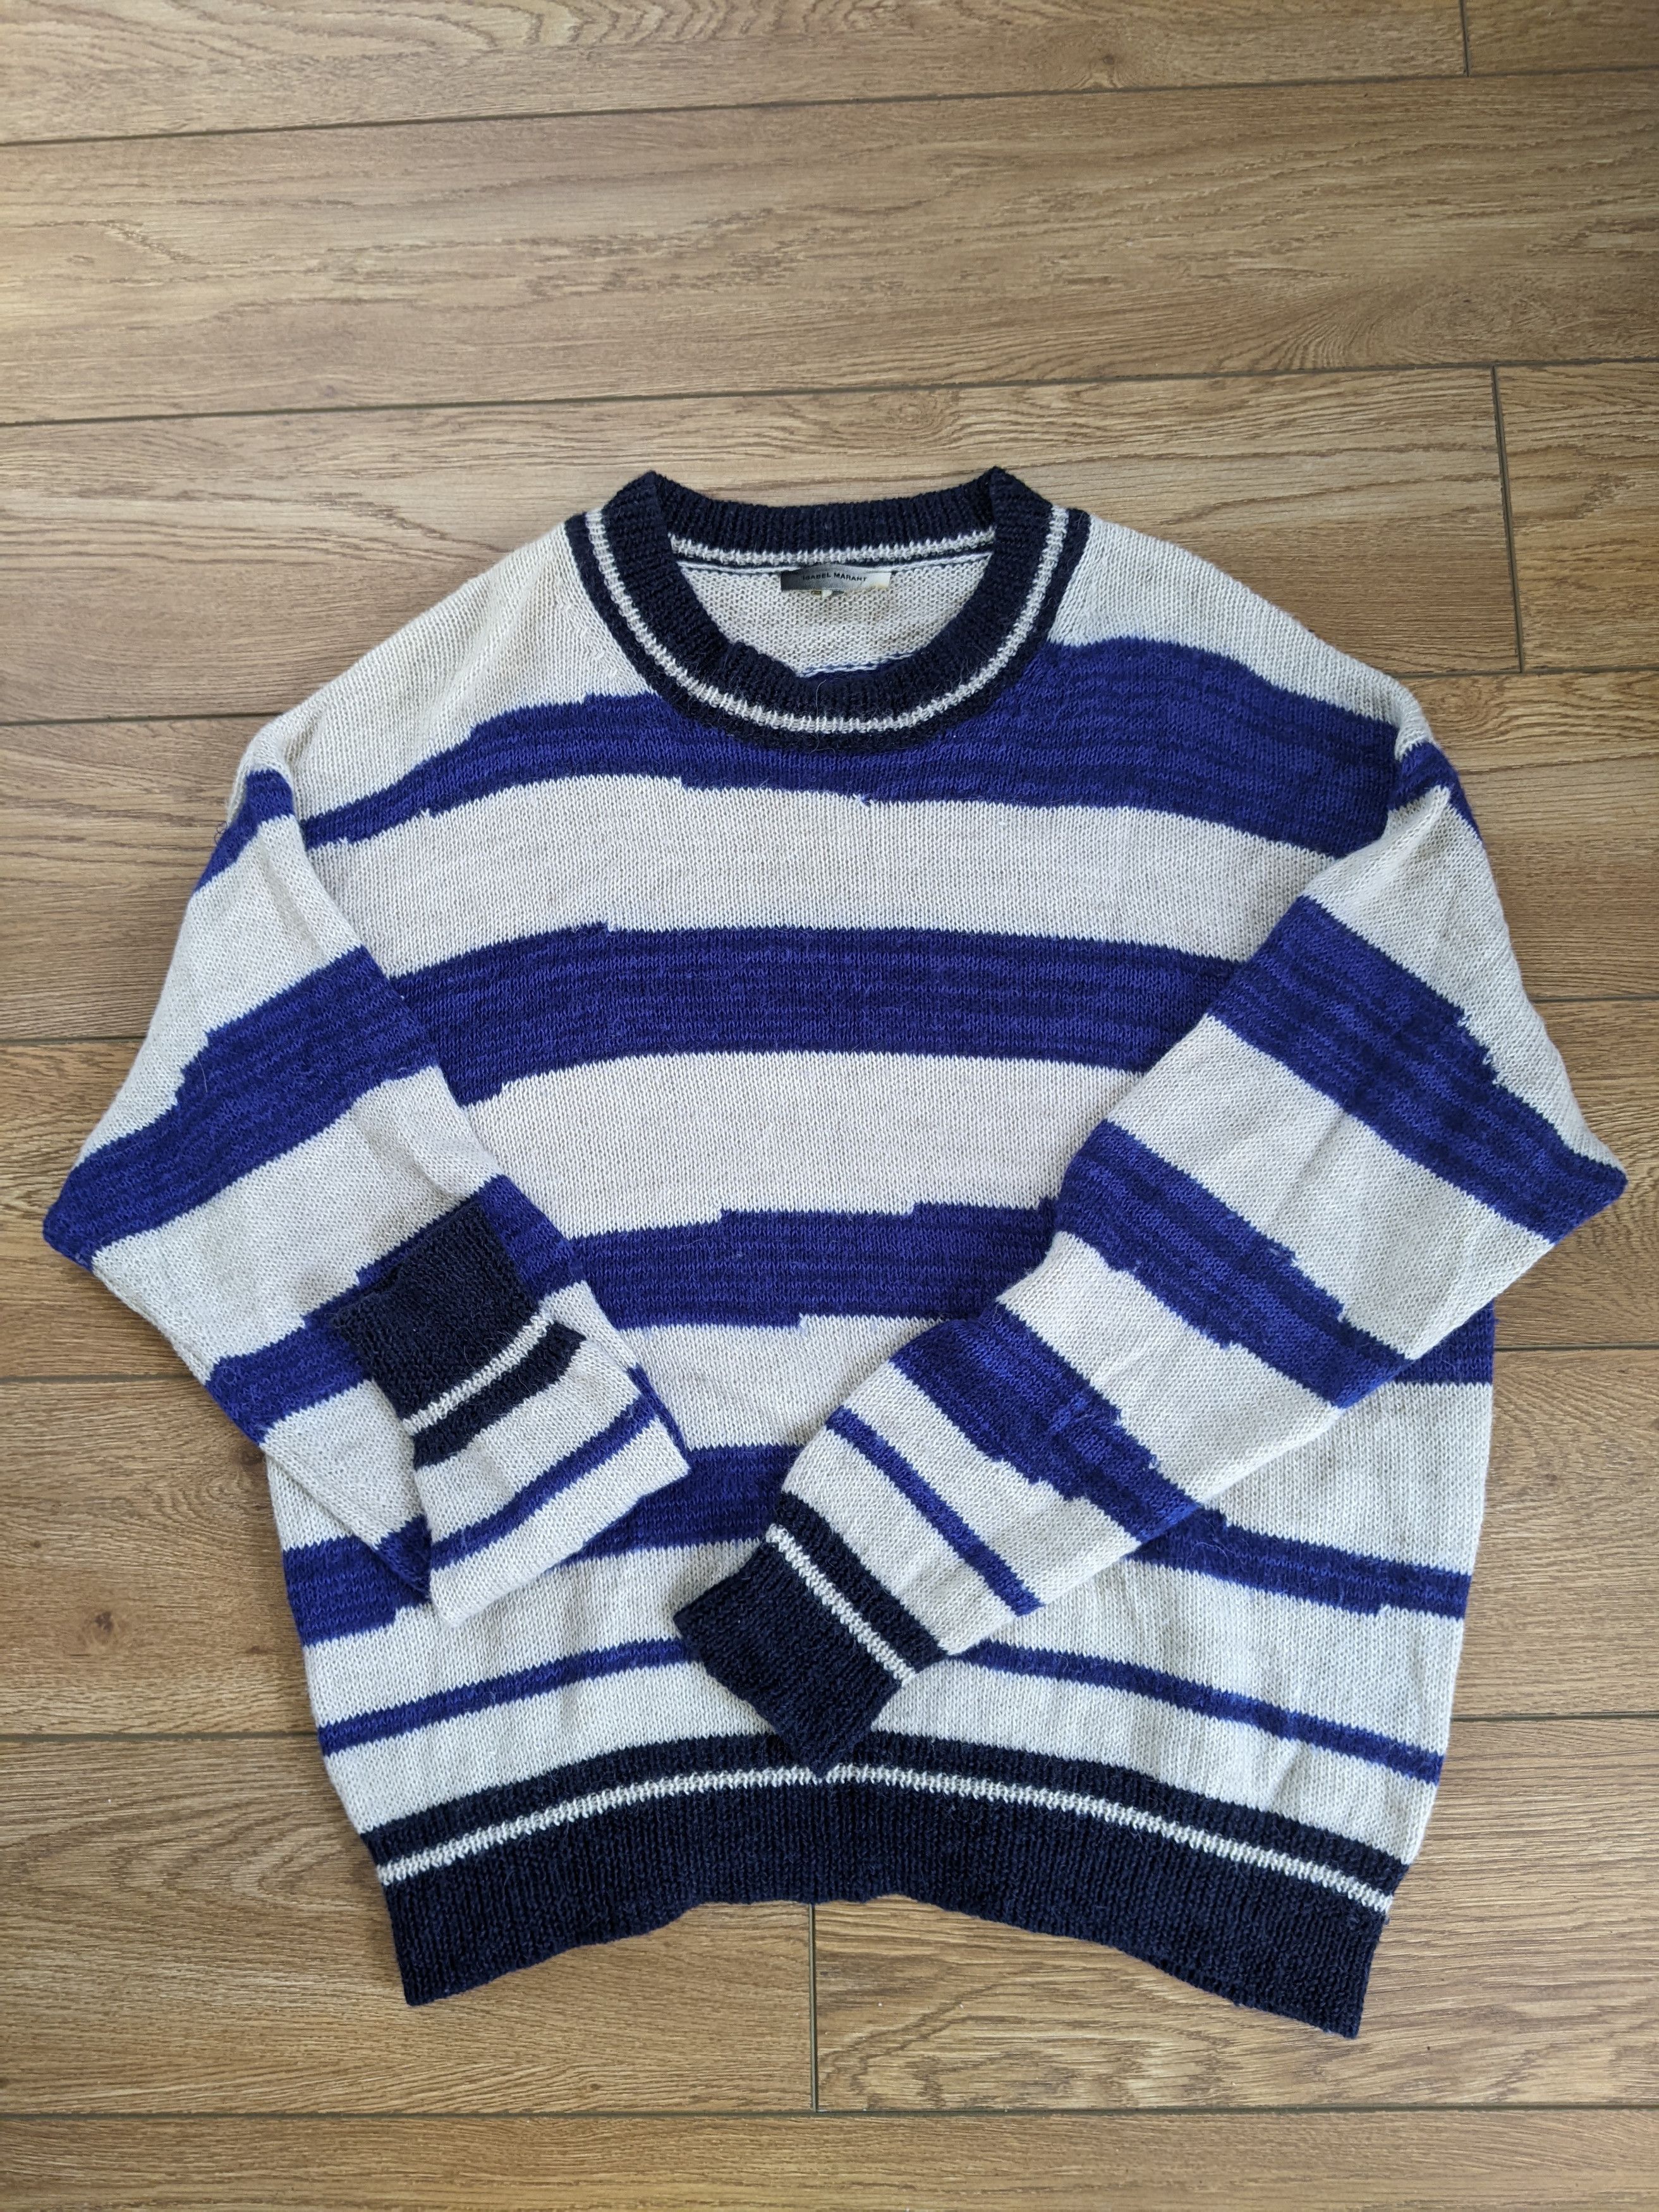 Isabel Marant Solwy sweater | Grailed